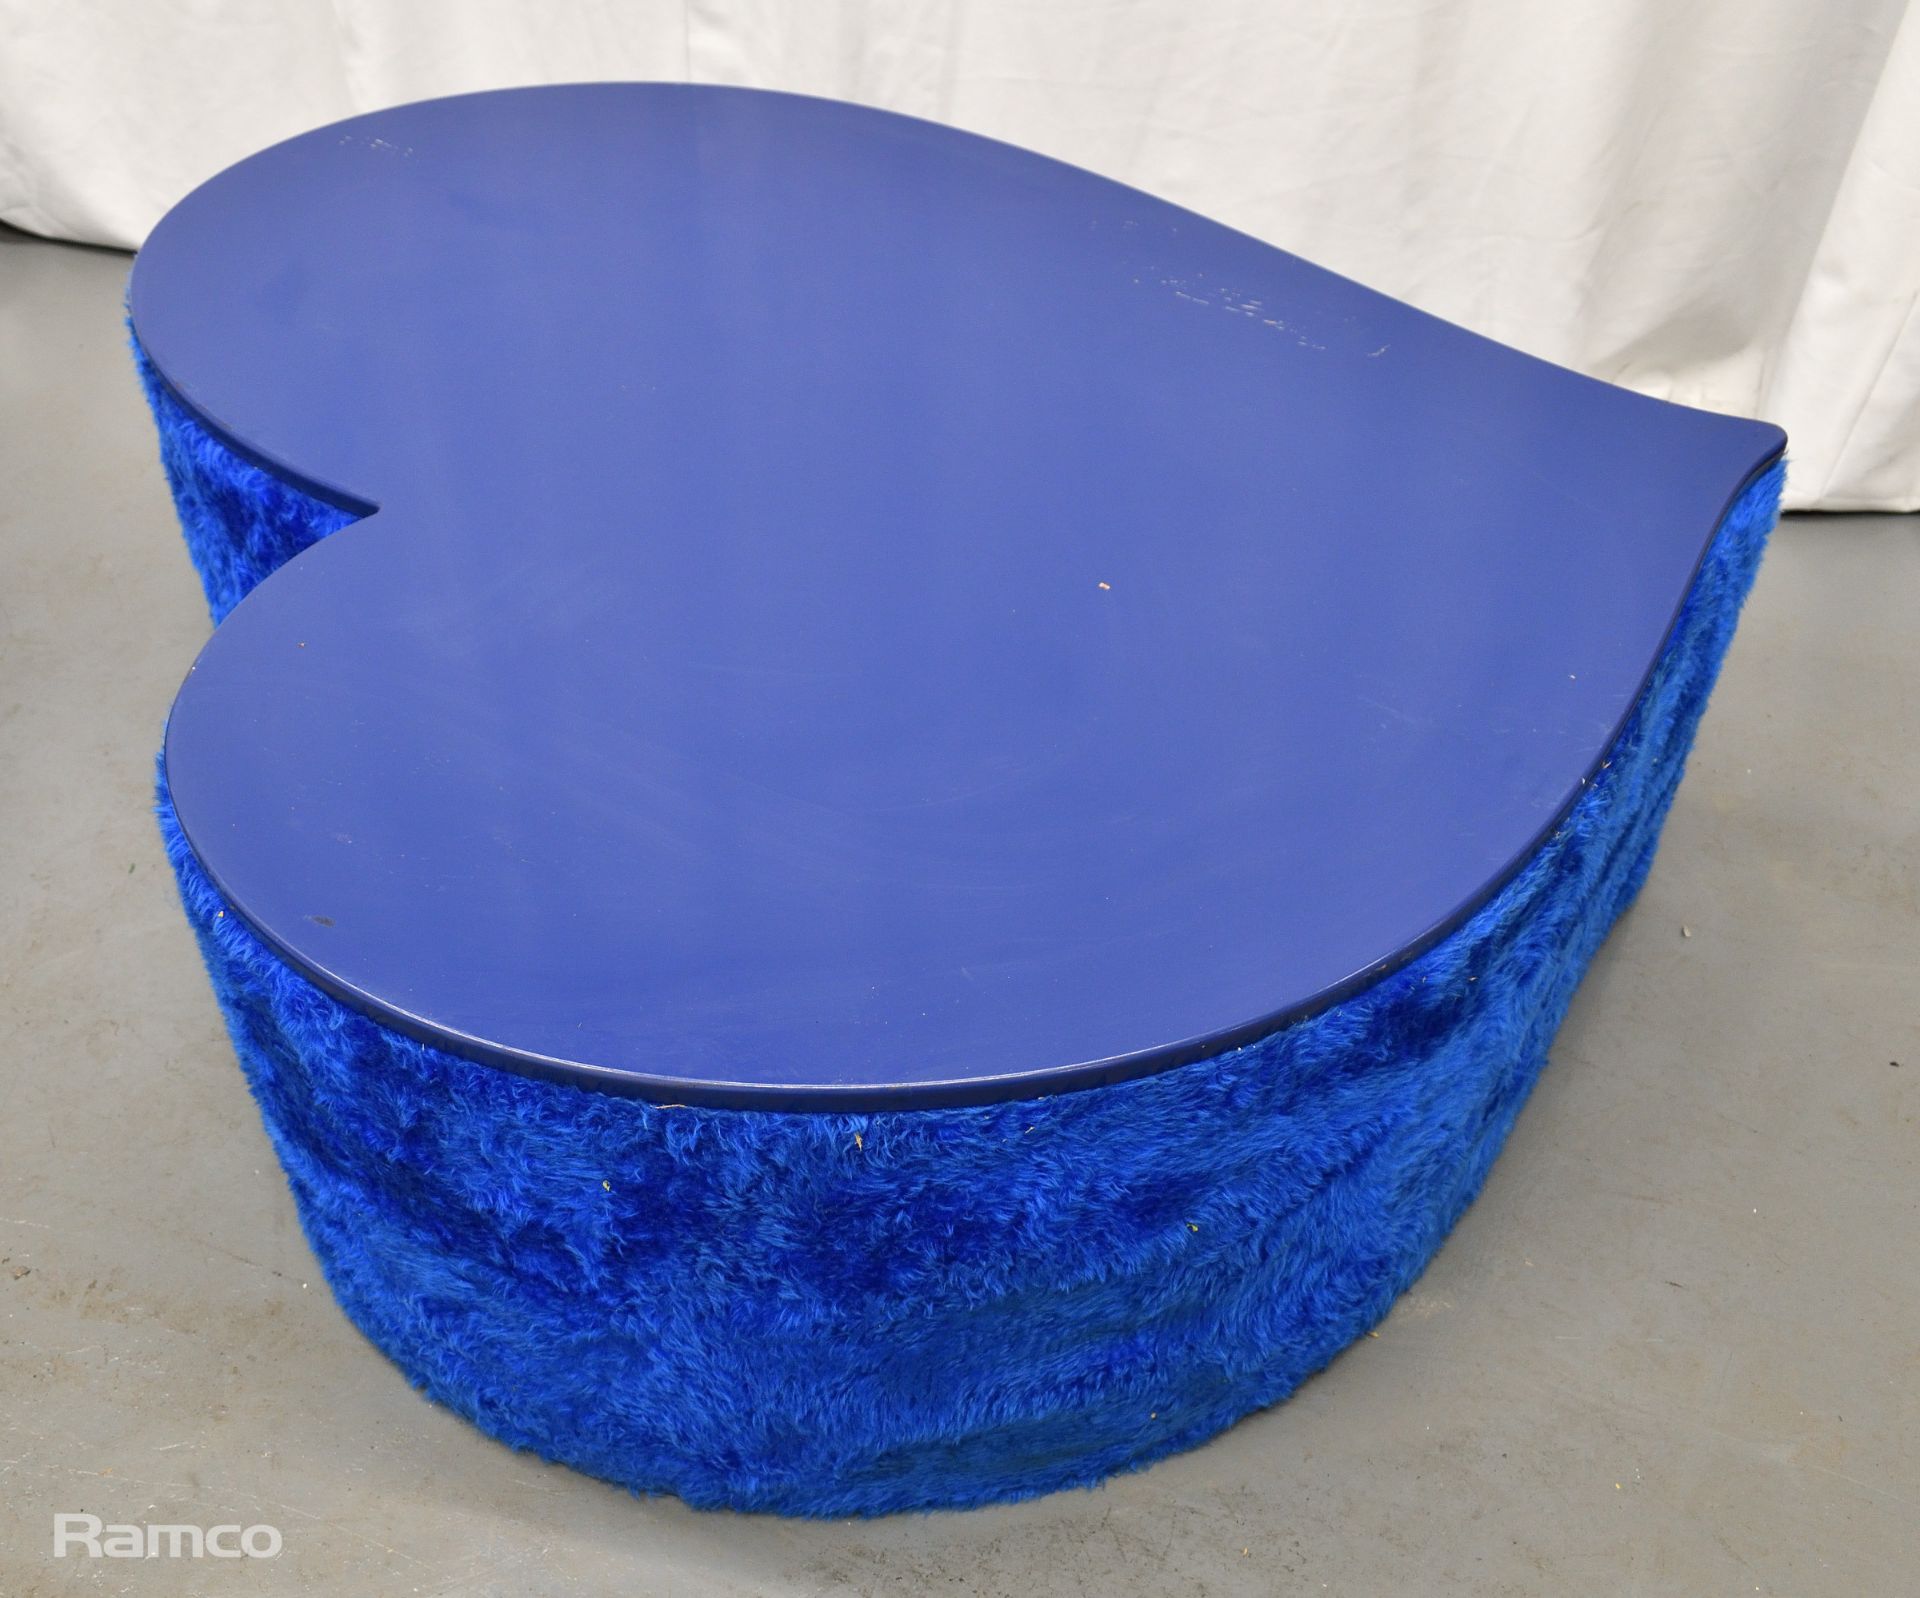 4x Asymmetrical heart shaped blue fur-covered wooden tables from countries' seating area - Image 10 of 18